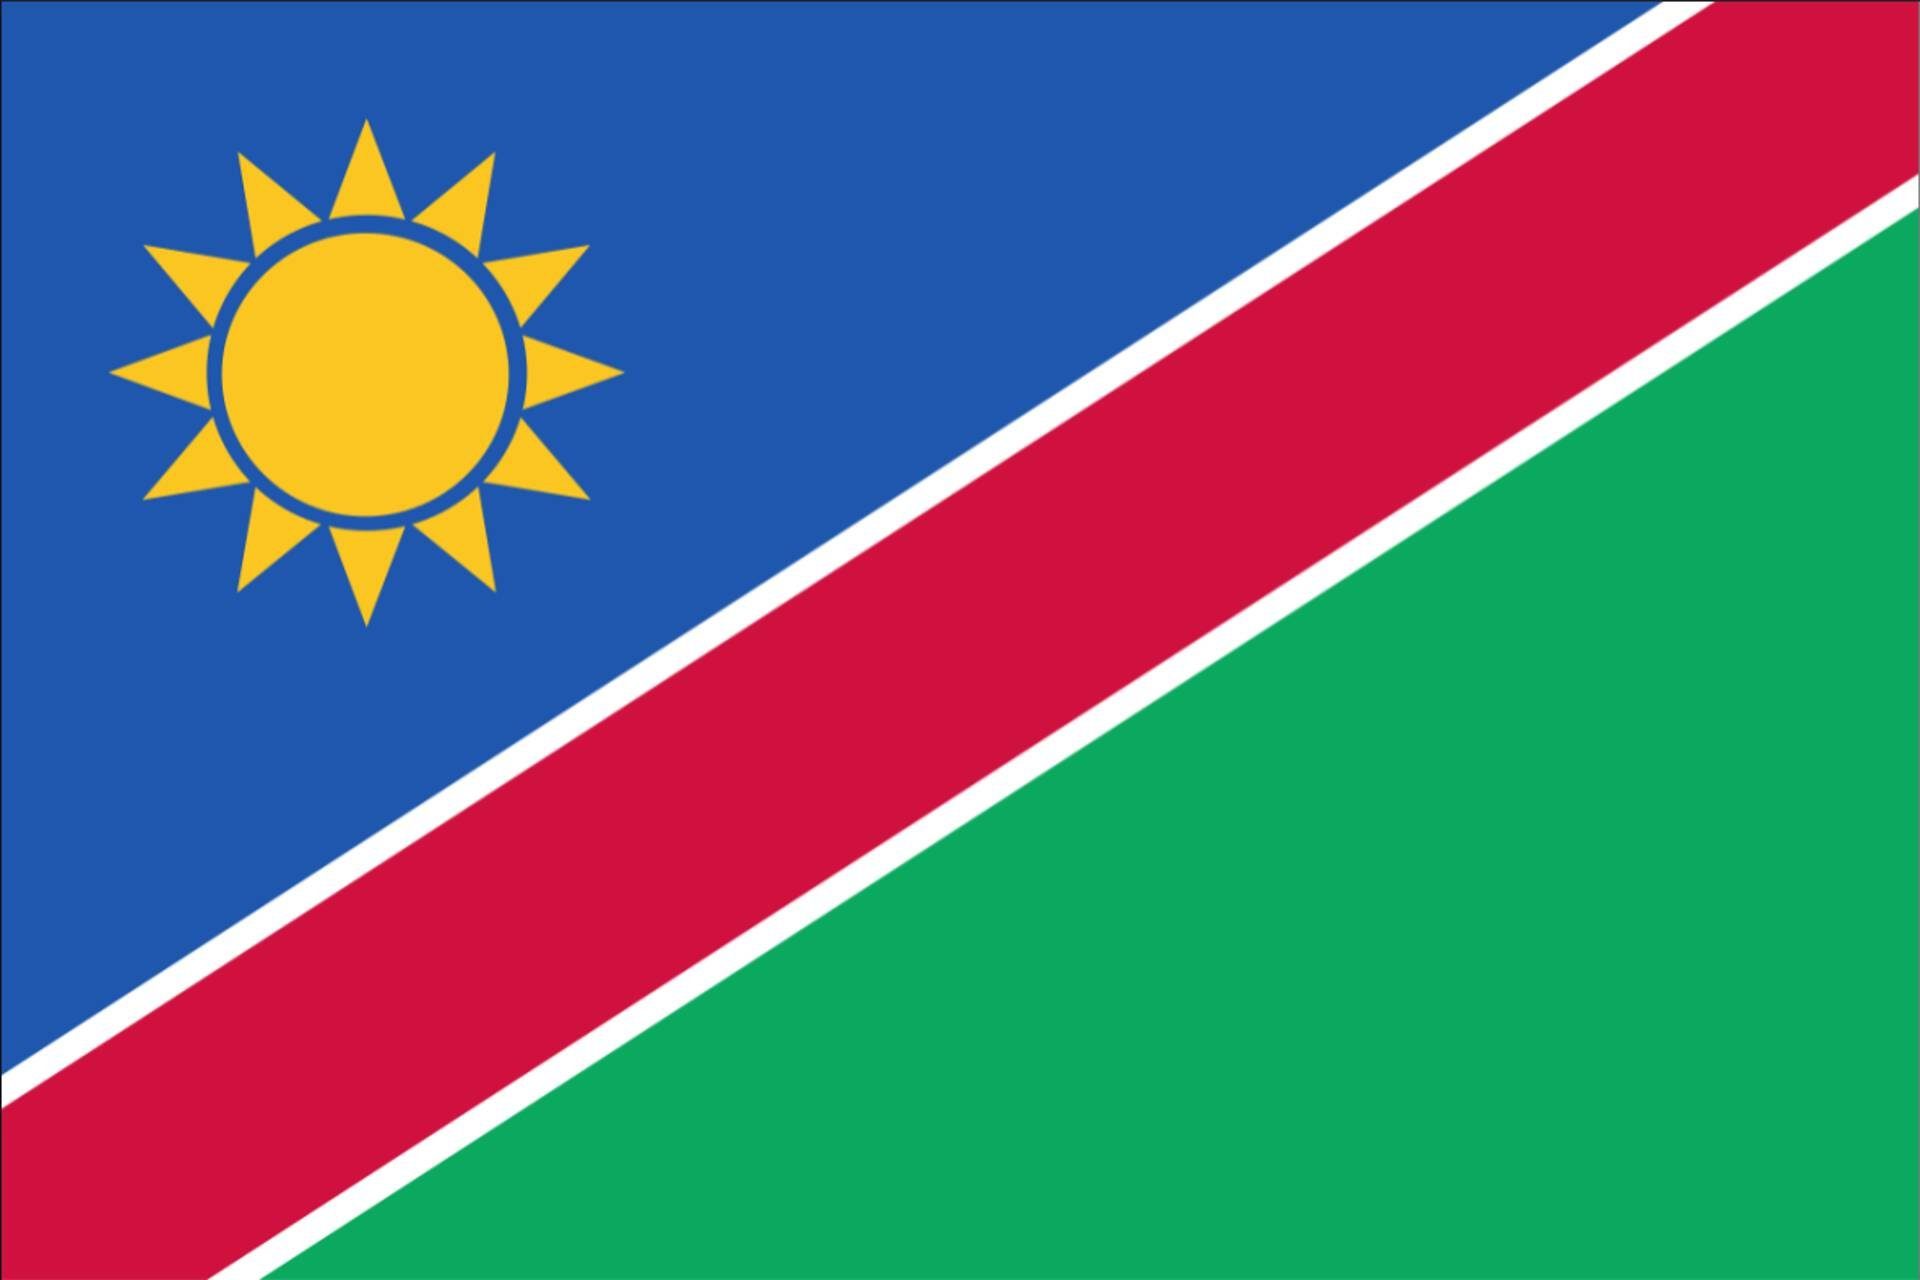 Querformat g/m² flaggenmeer 120 Namibia Flagge